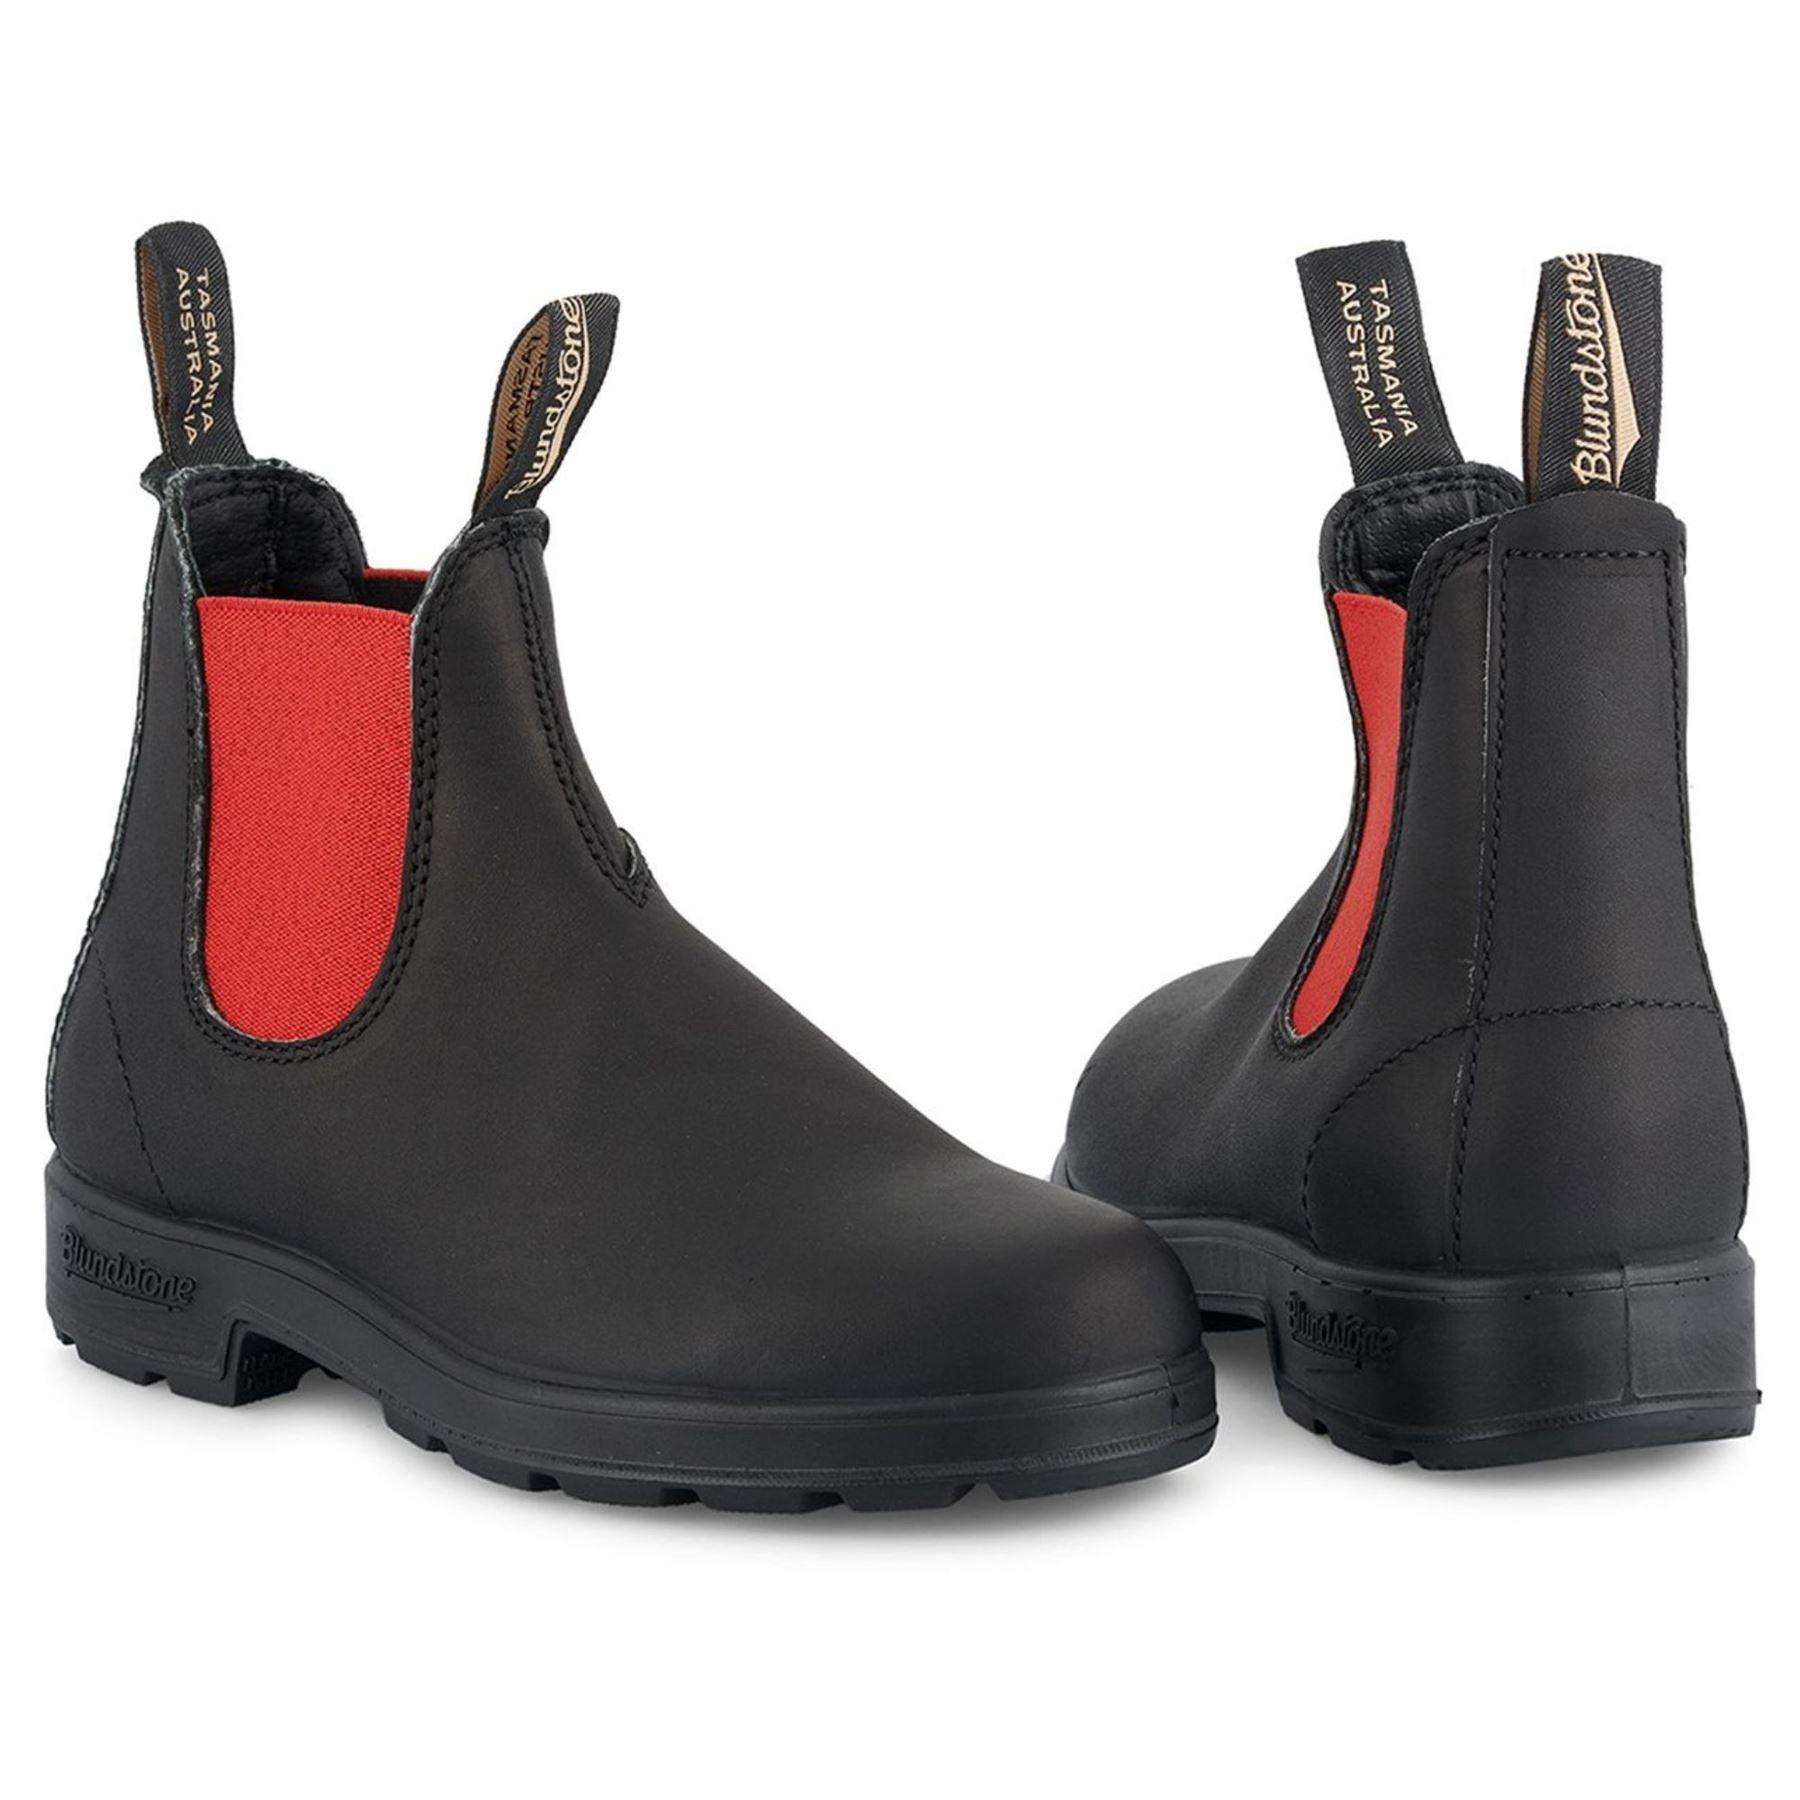 Blundstone boots in UK